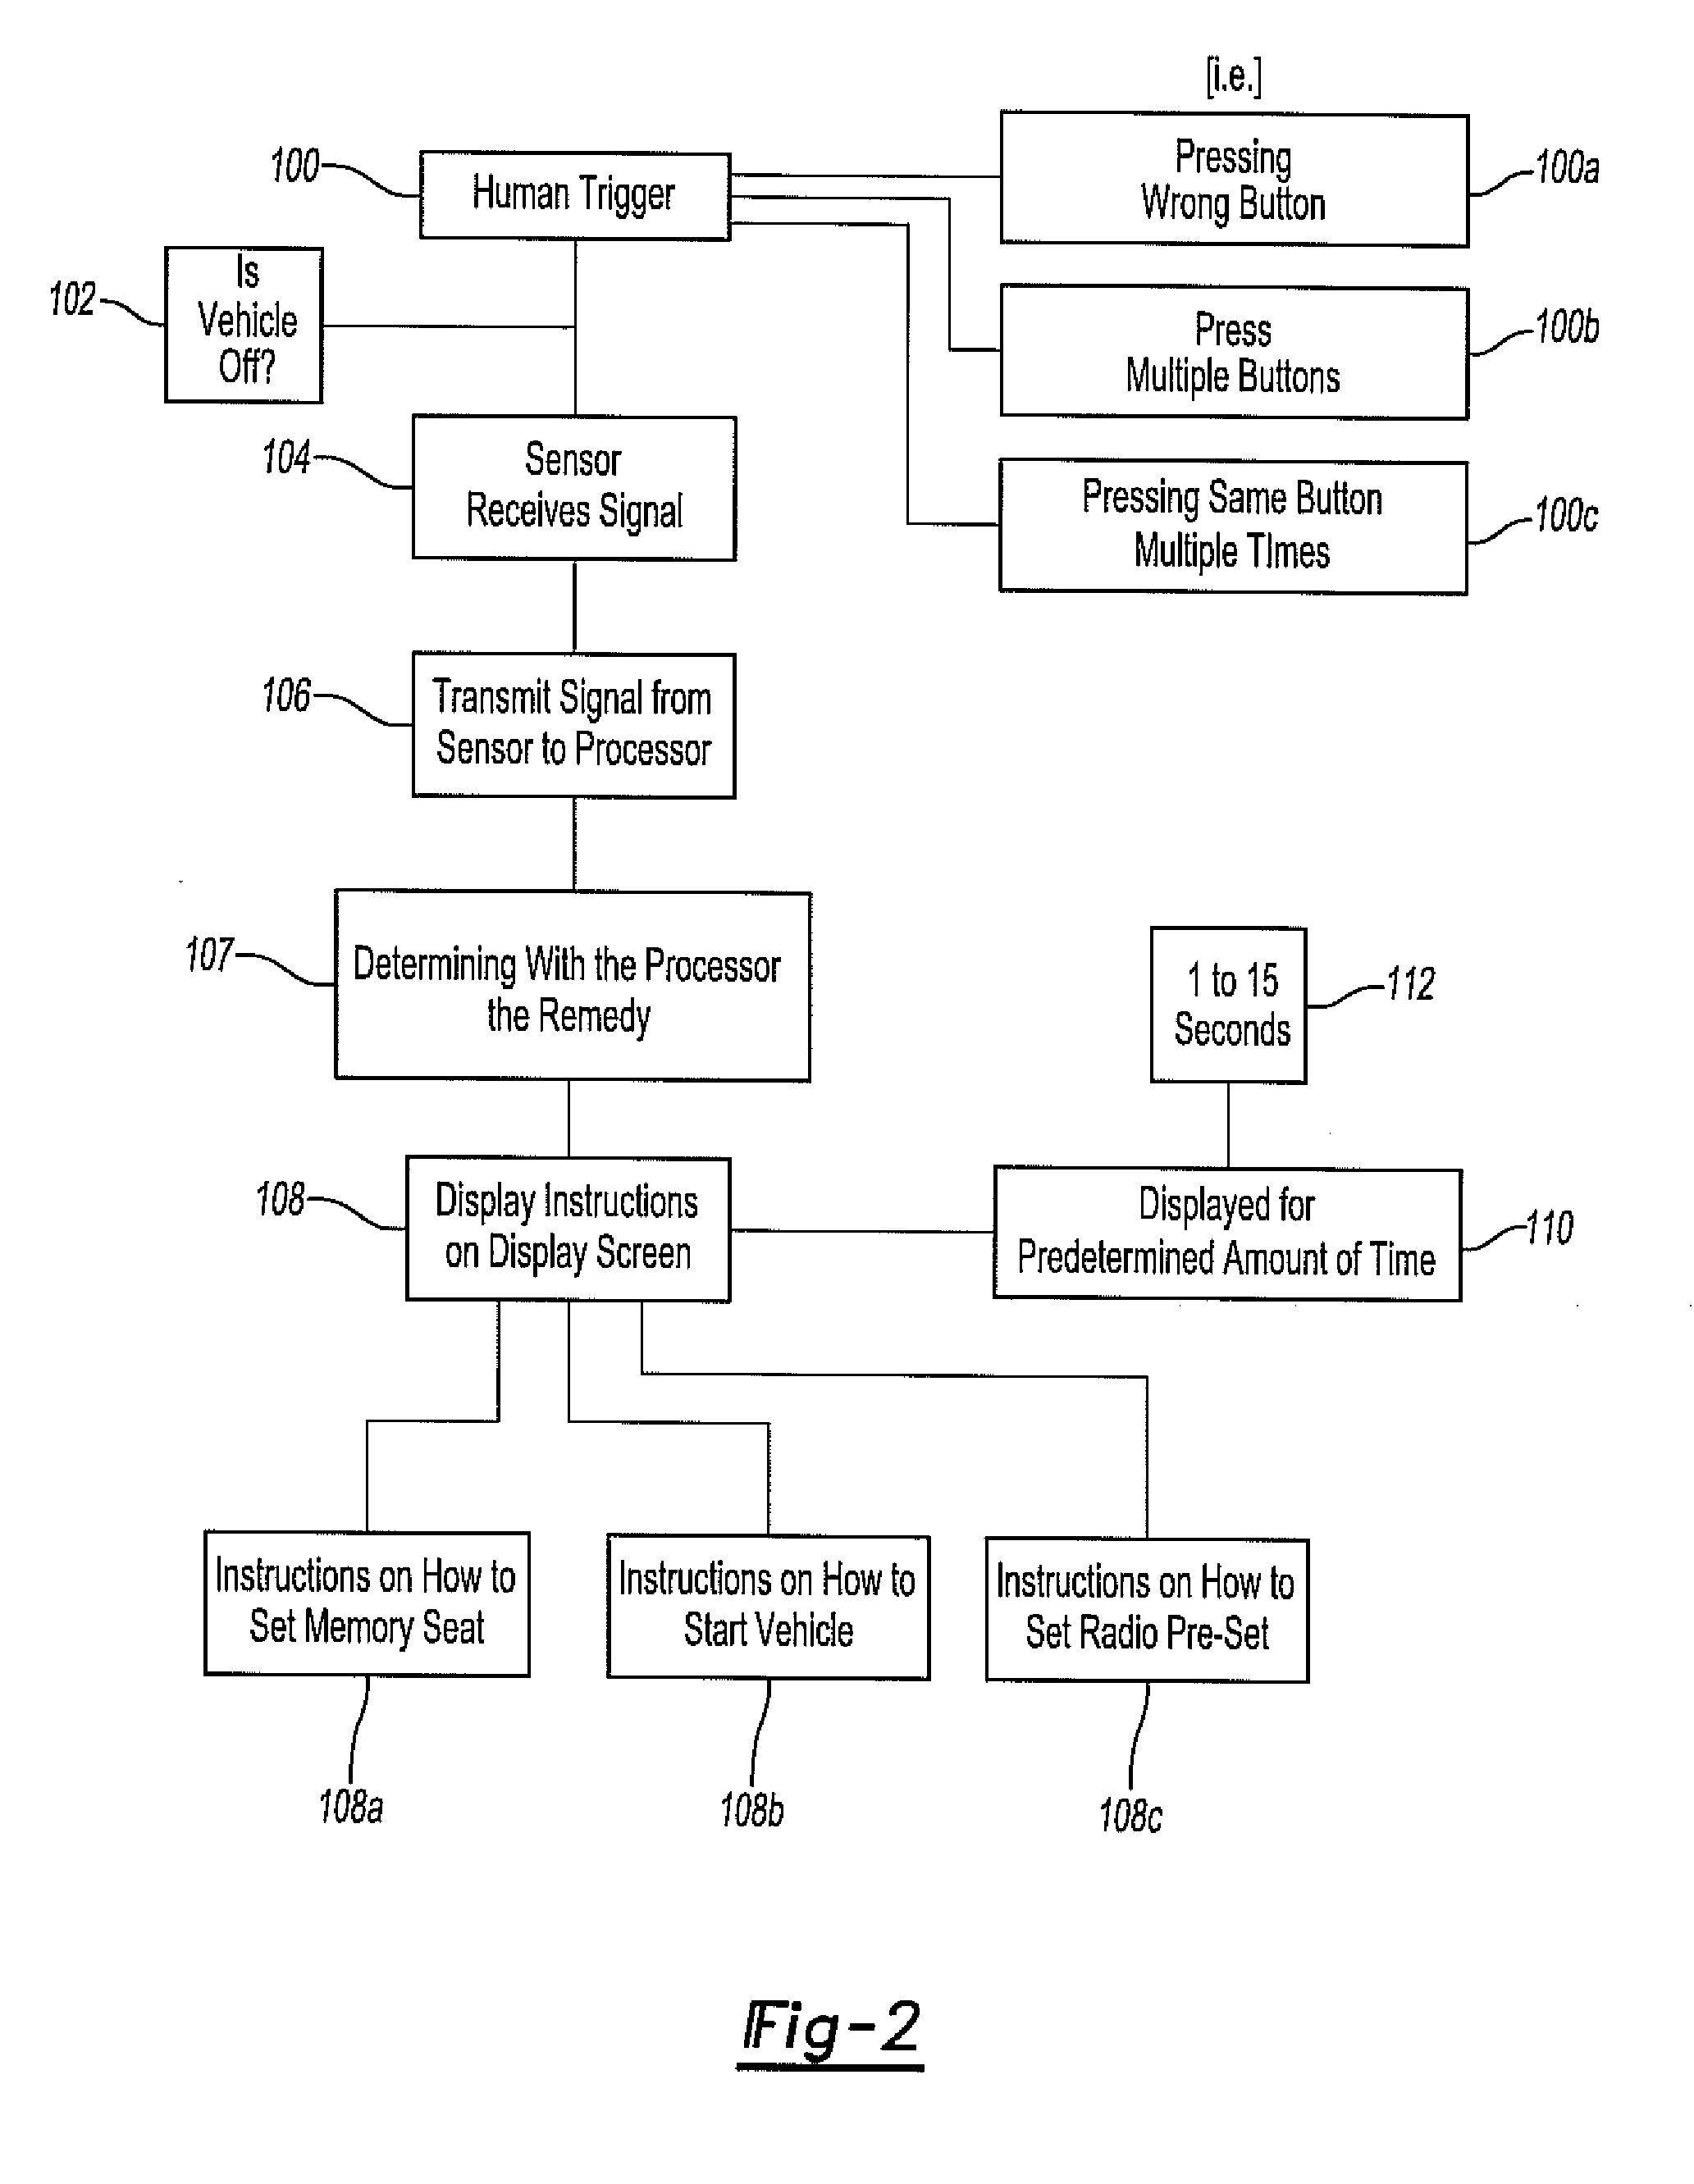 Method of detection of user confusion having follow-up instructions